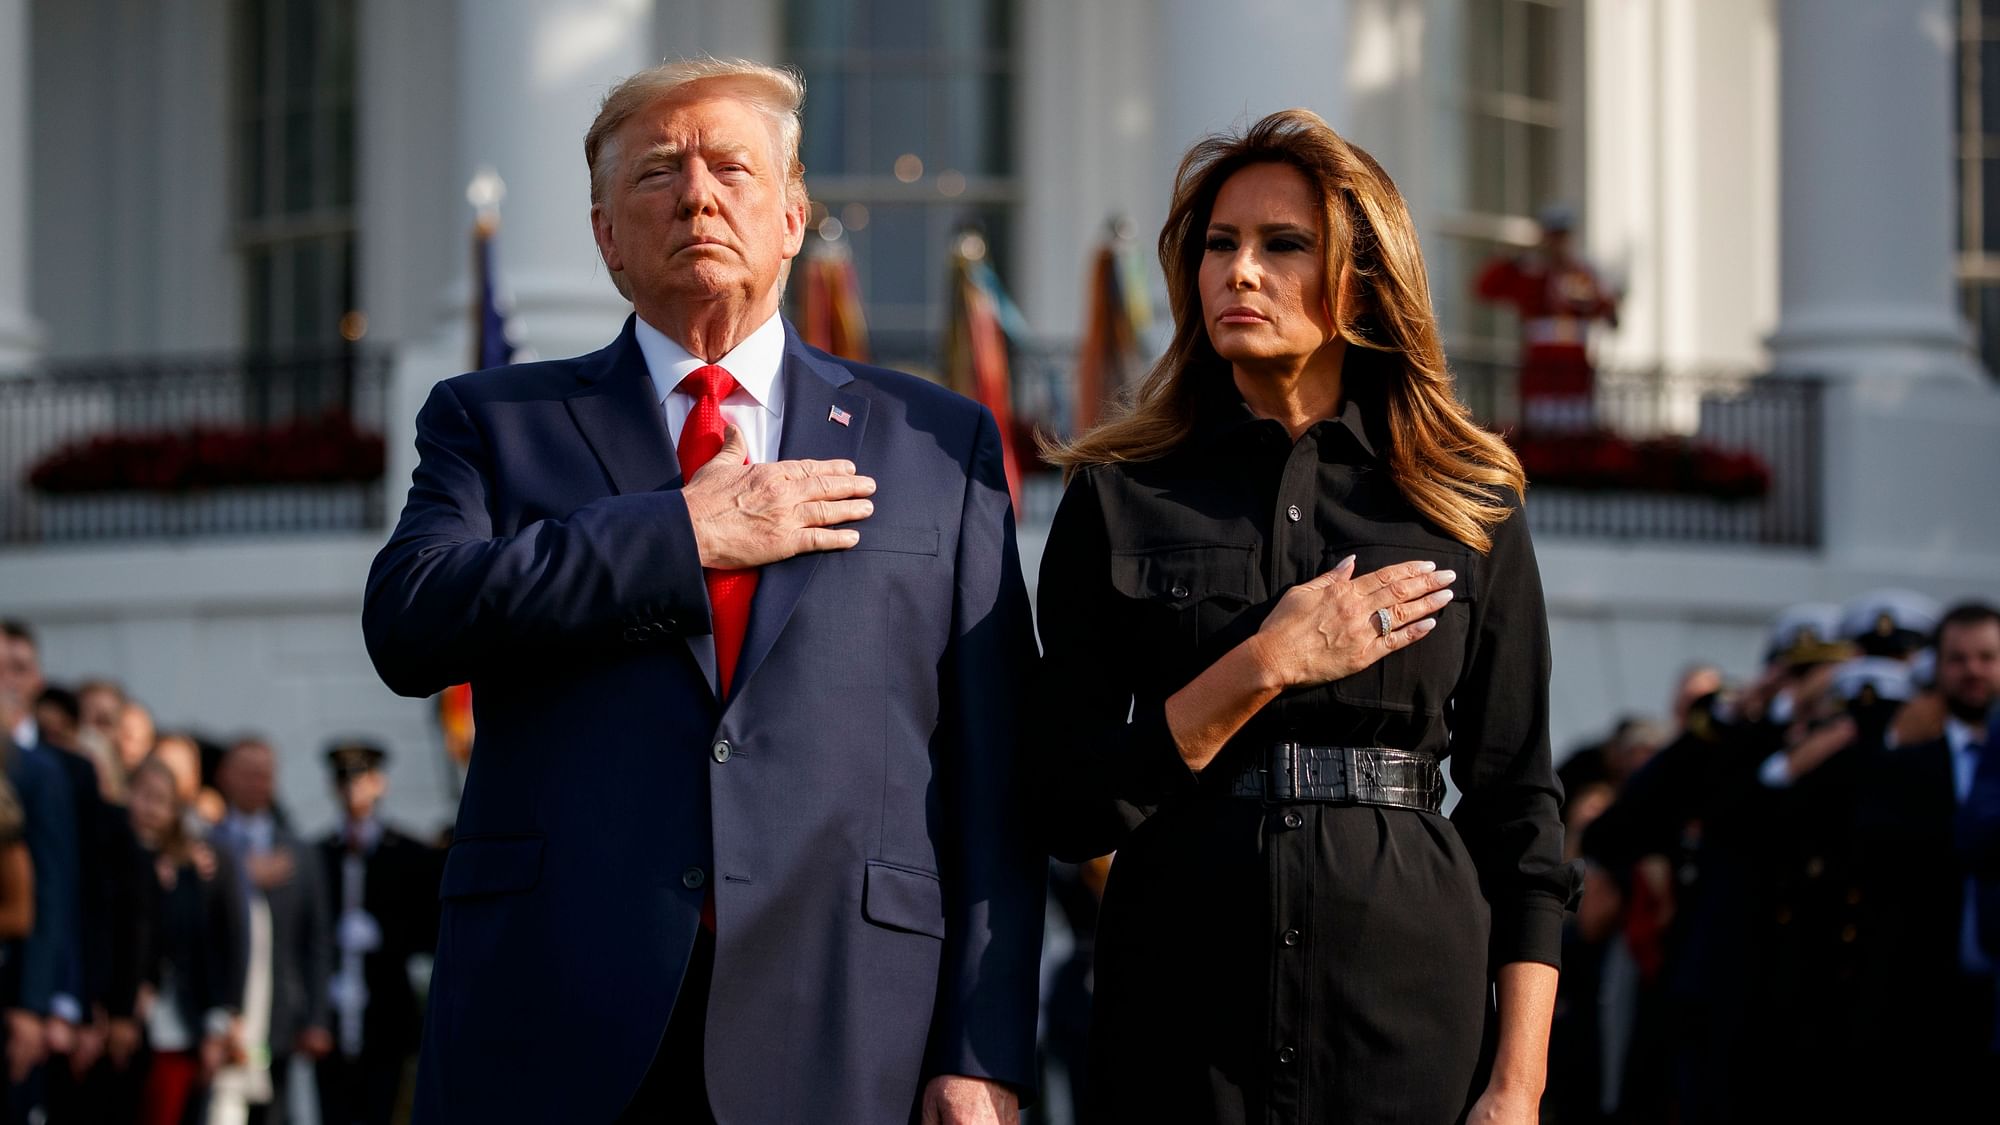 President Donald Trump and first lady Melania Trump participate in a moment of silence honoring the victims of the 11 September terrorist attacks.